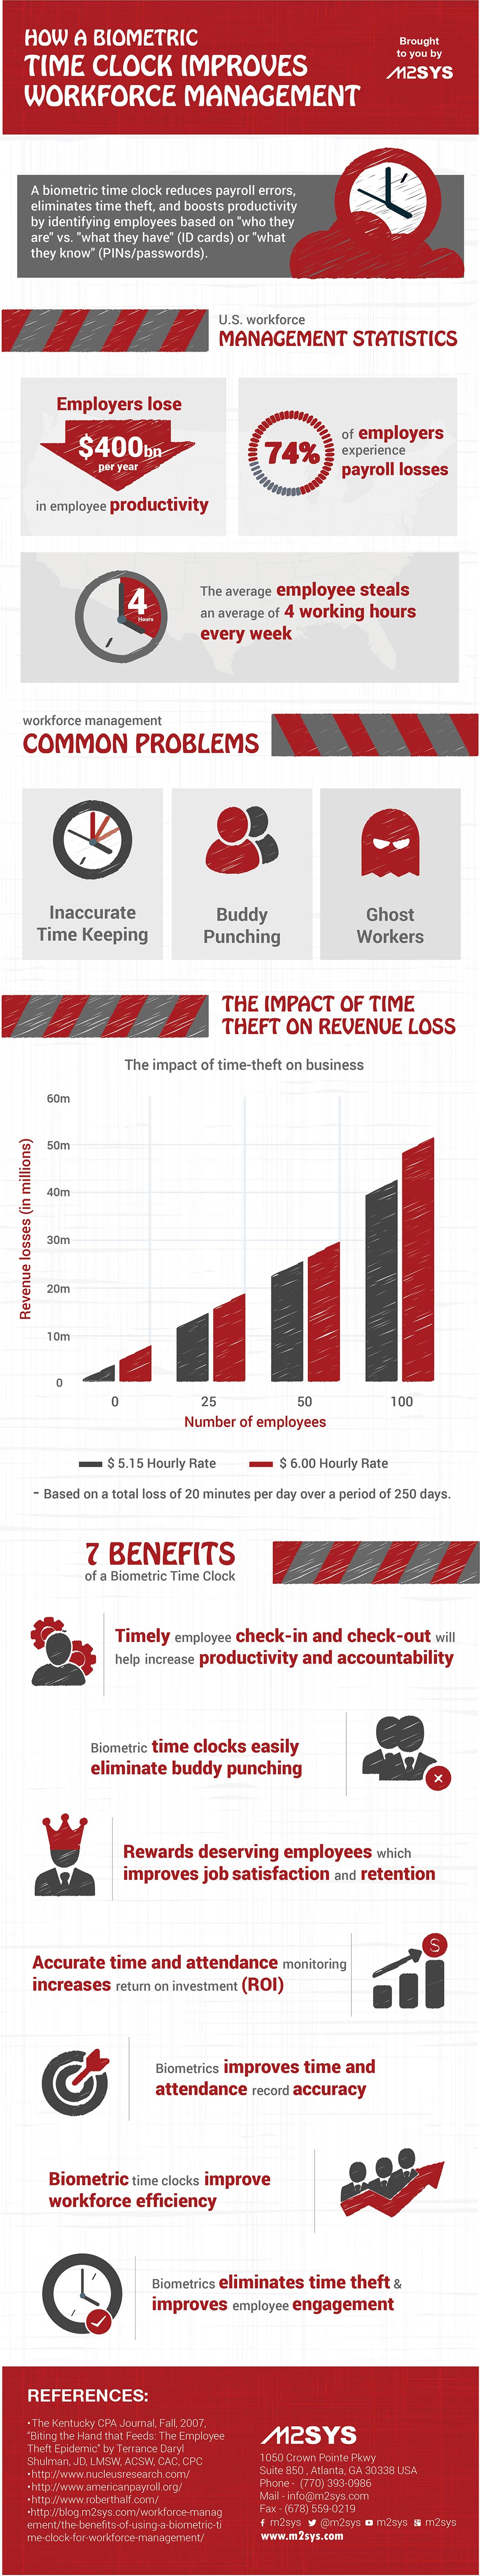 Improves Workforce Management with biometric time clock infographic